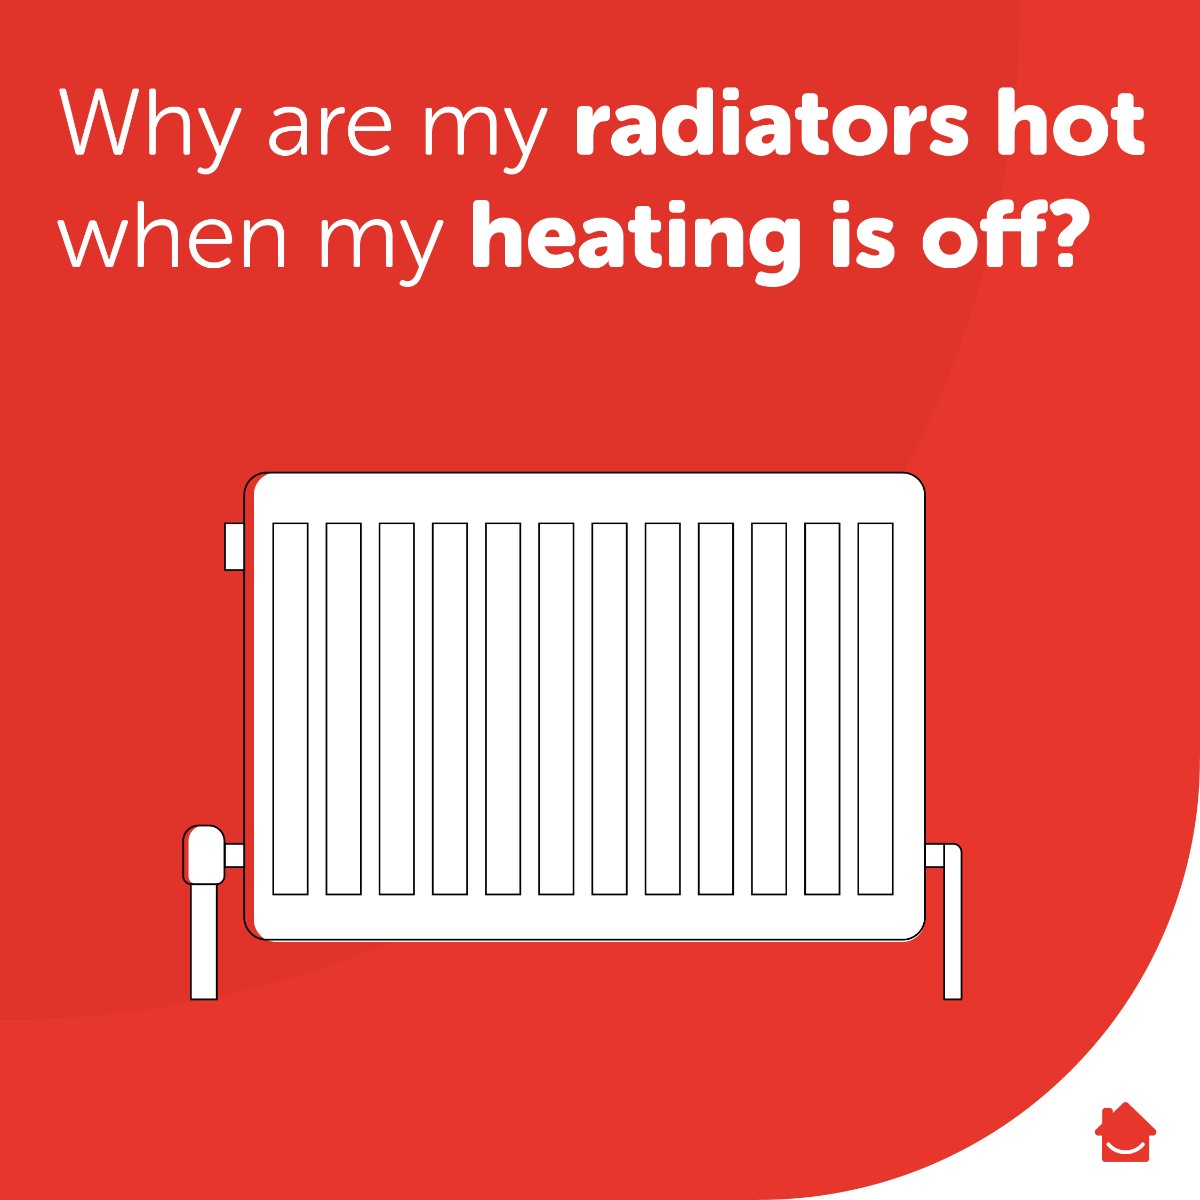 Is the heating off but your radiators didn’t get the memo? Get everything working in sync again, and save on those costly energy bills, using our how-to guide 🔎 brnw.ch/21wJFhh